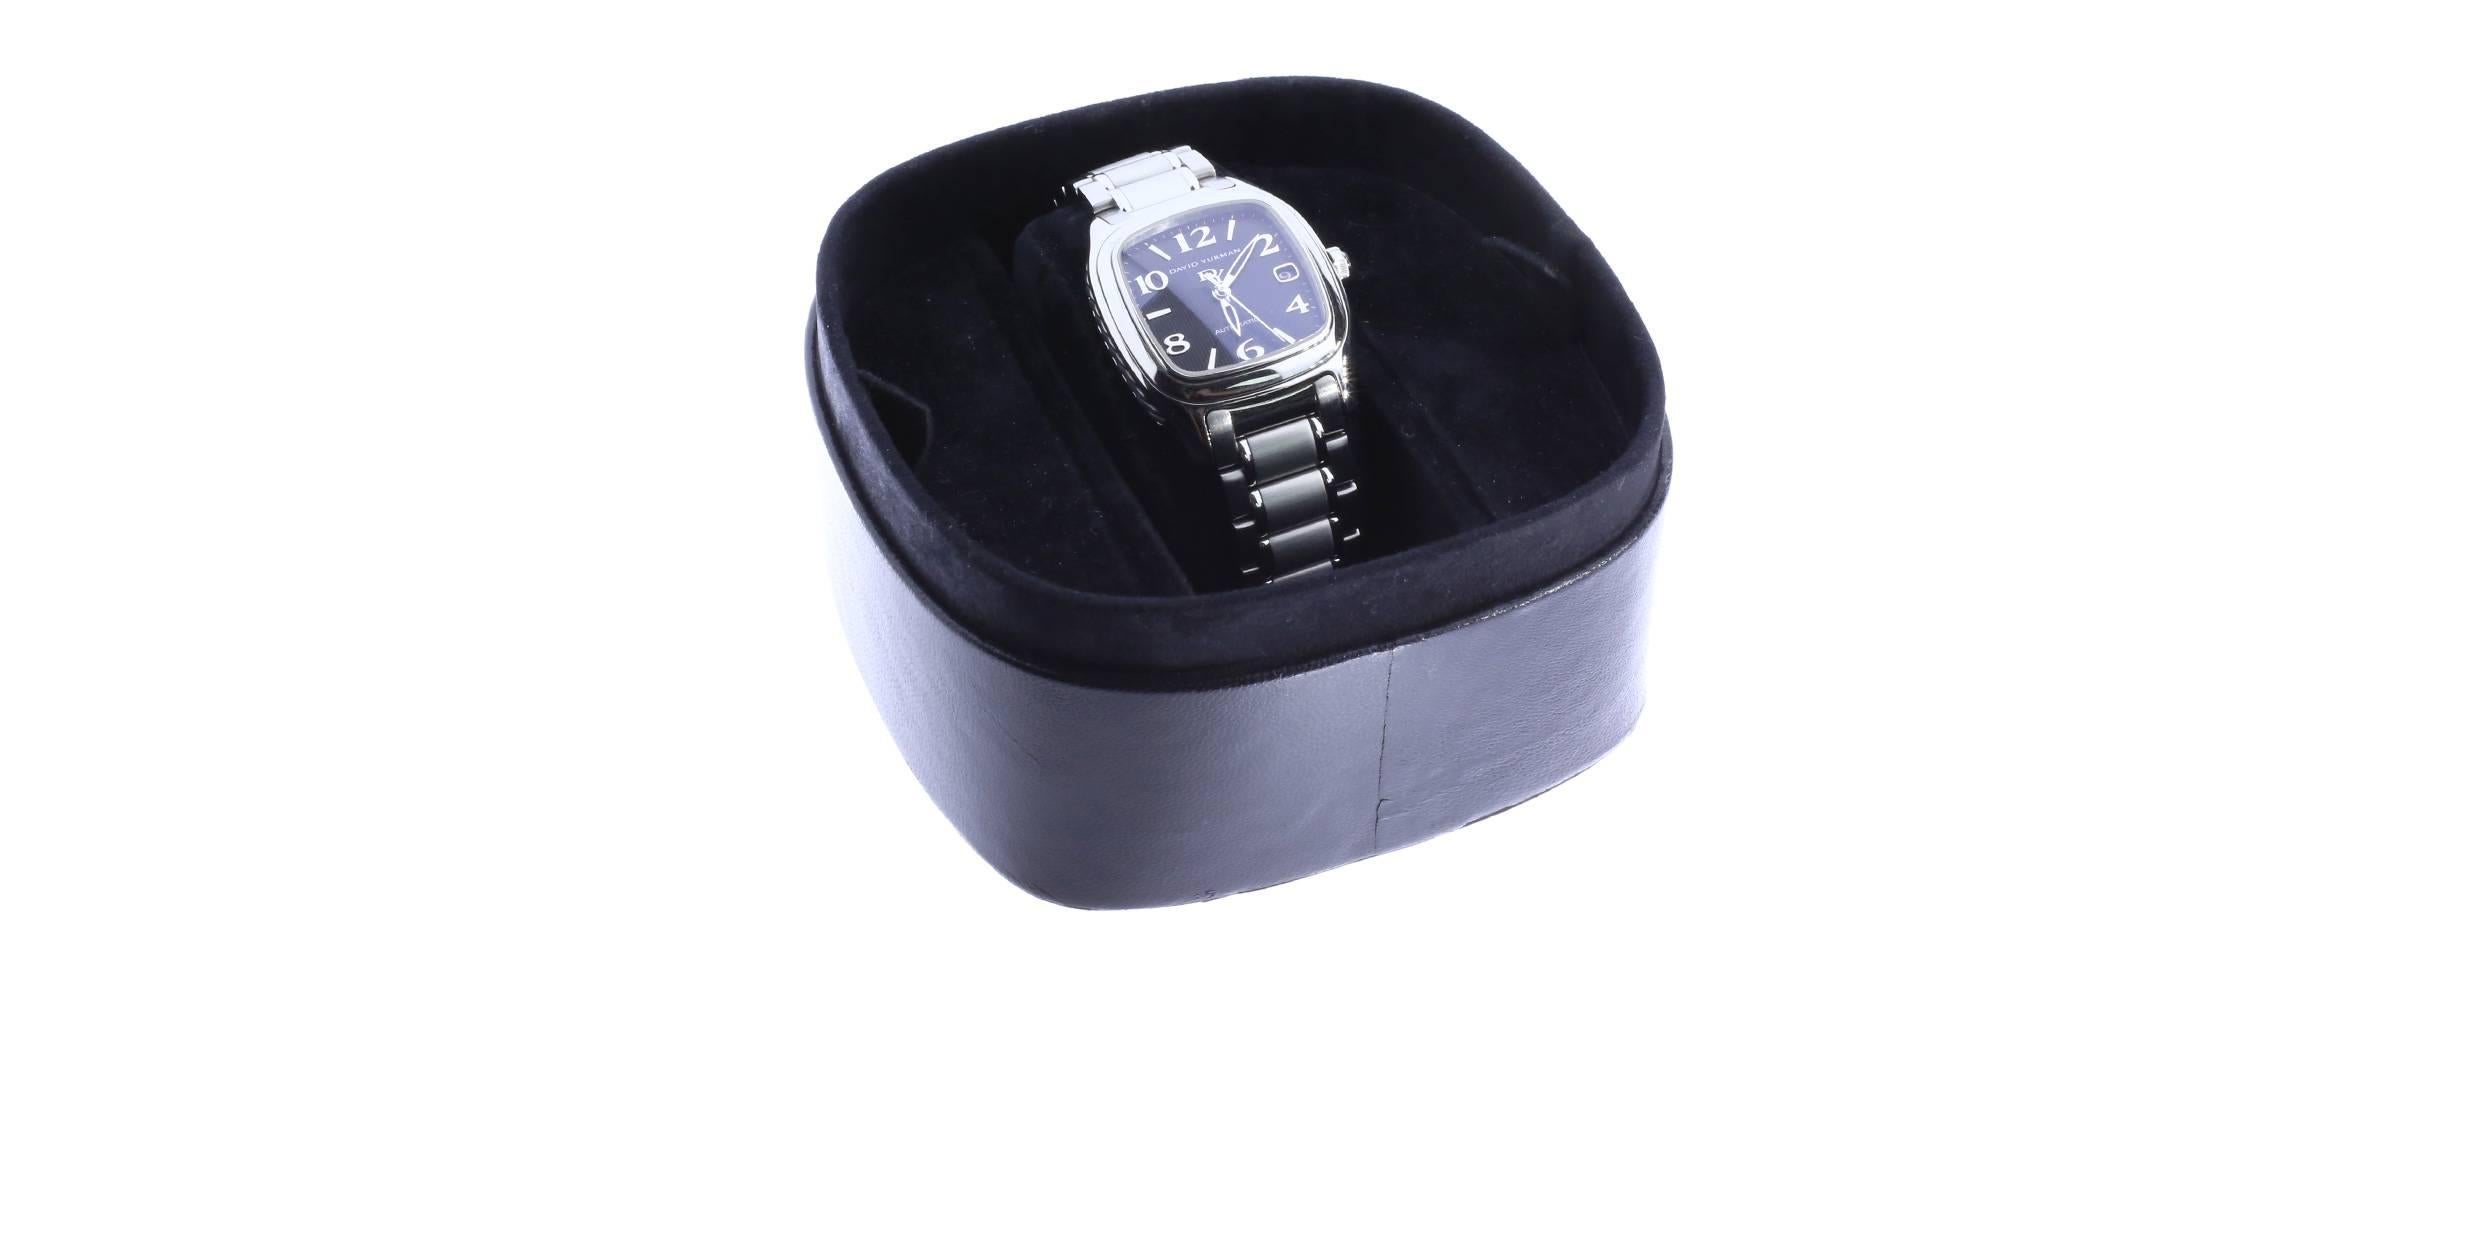 This David Yurman watch is comprised of stainless steel and sterling silver. The watch features a black stick cushion shaped dial with the date, cabochon crown and cable accent sides. The bracelet is polished and satin finish. The watch features an